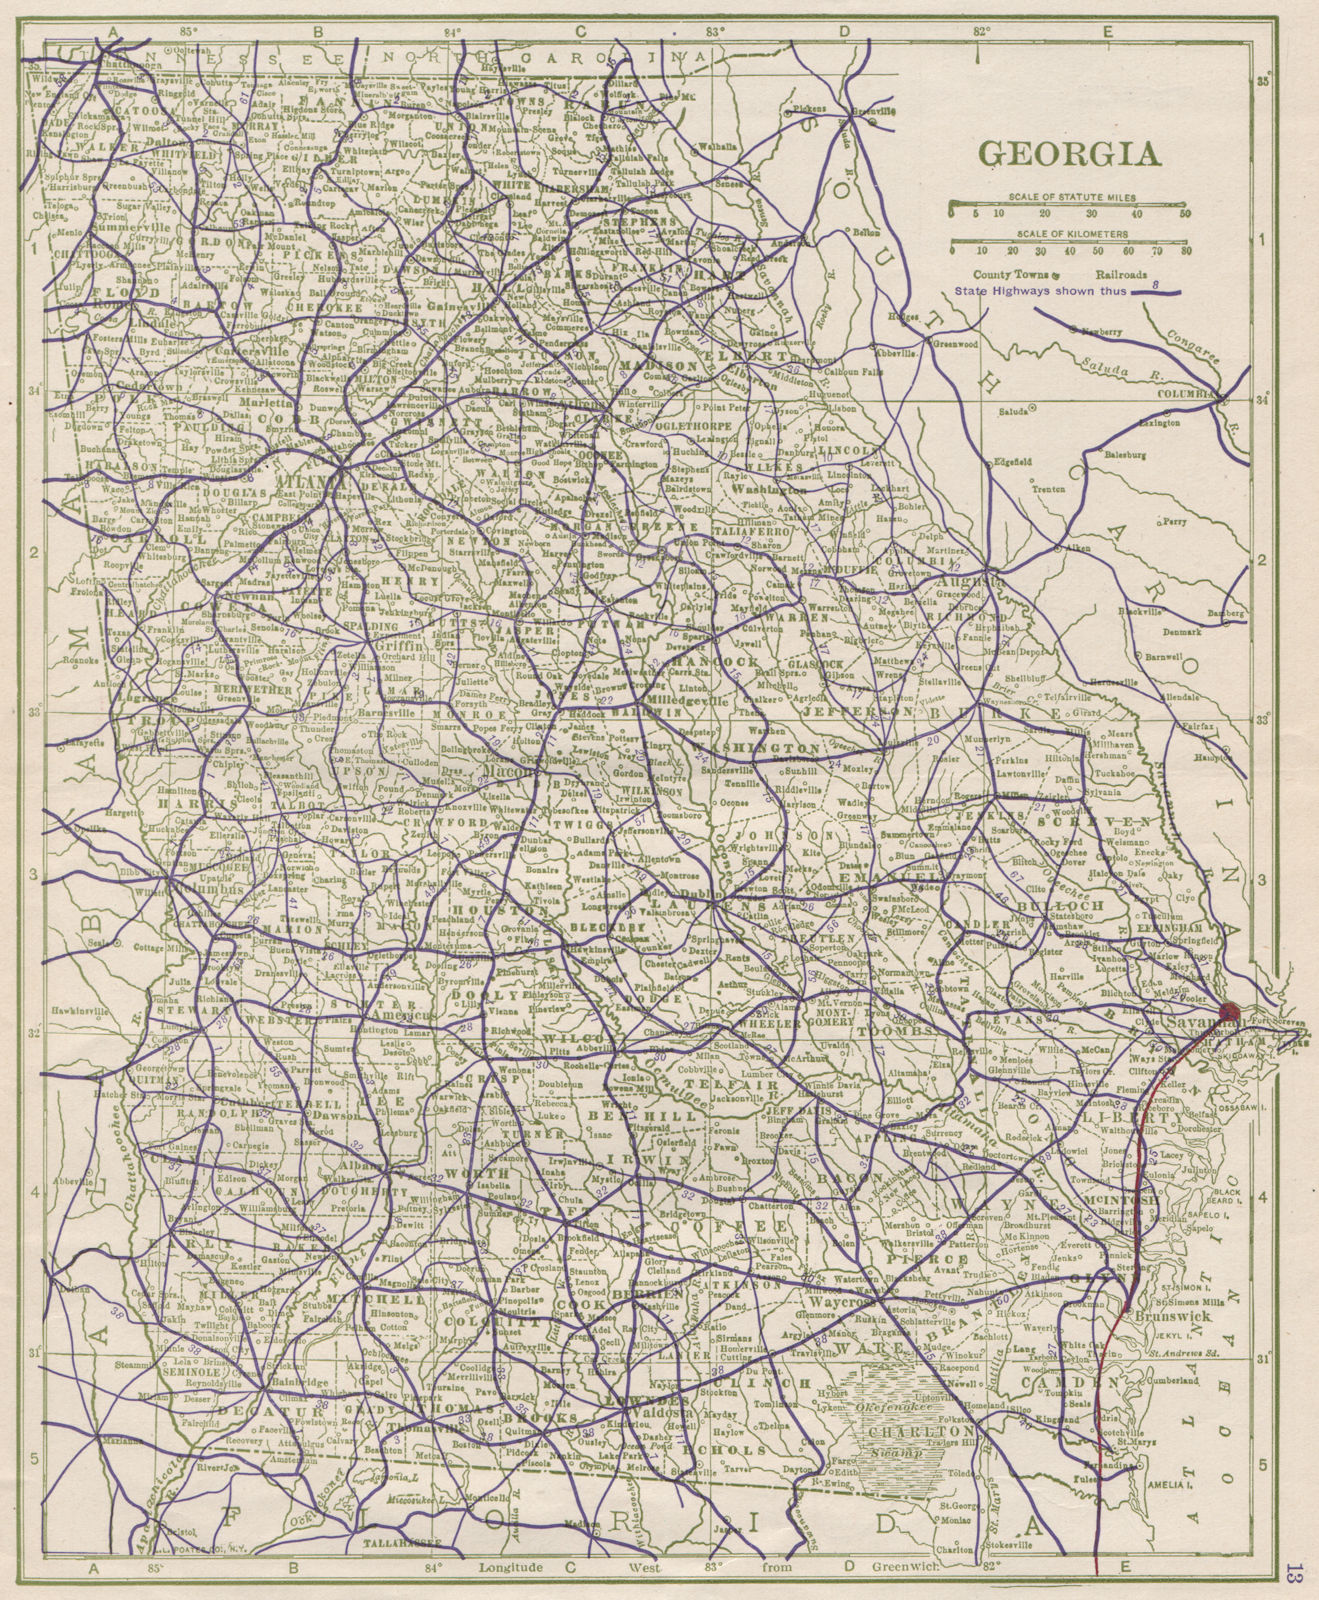 Associate Product Georgia State Highways. POATES 1925 old vintage map plan chart